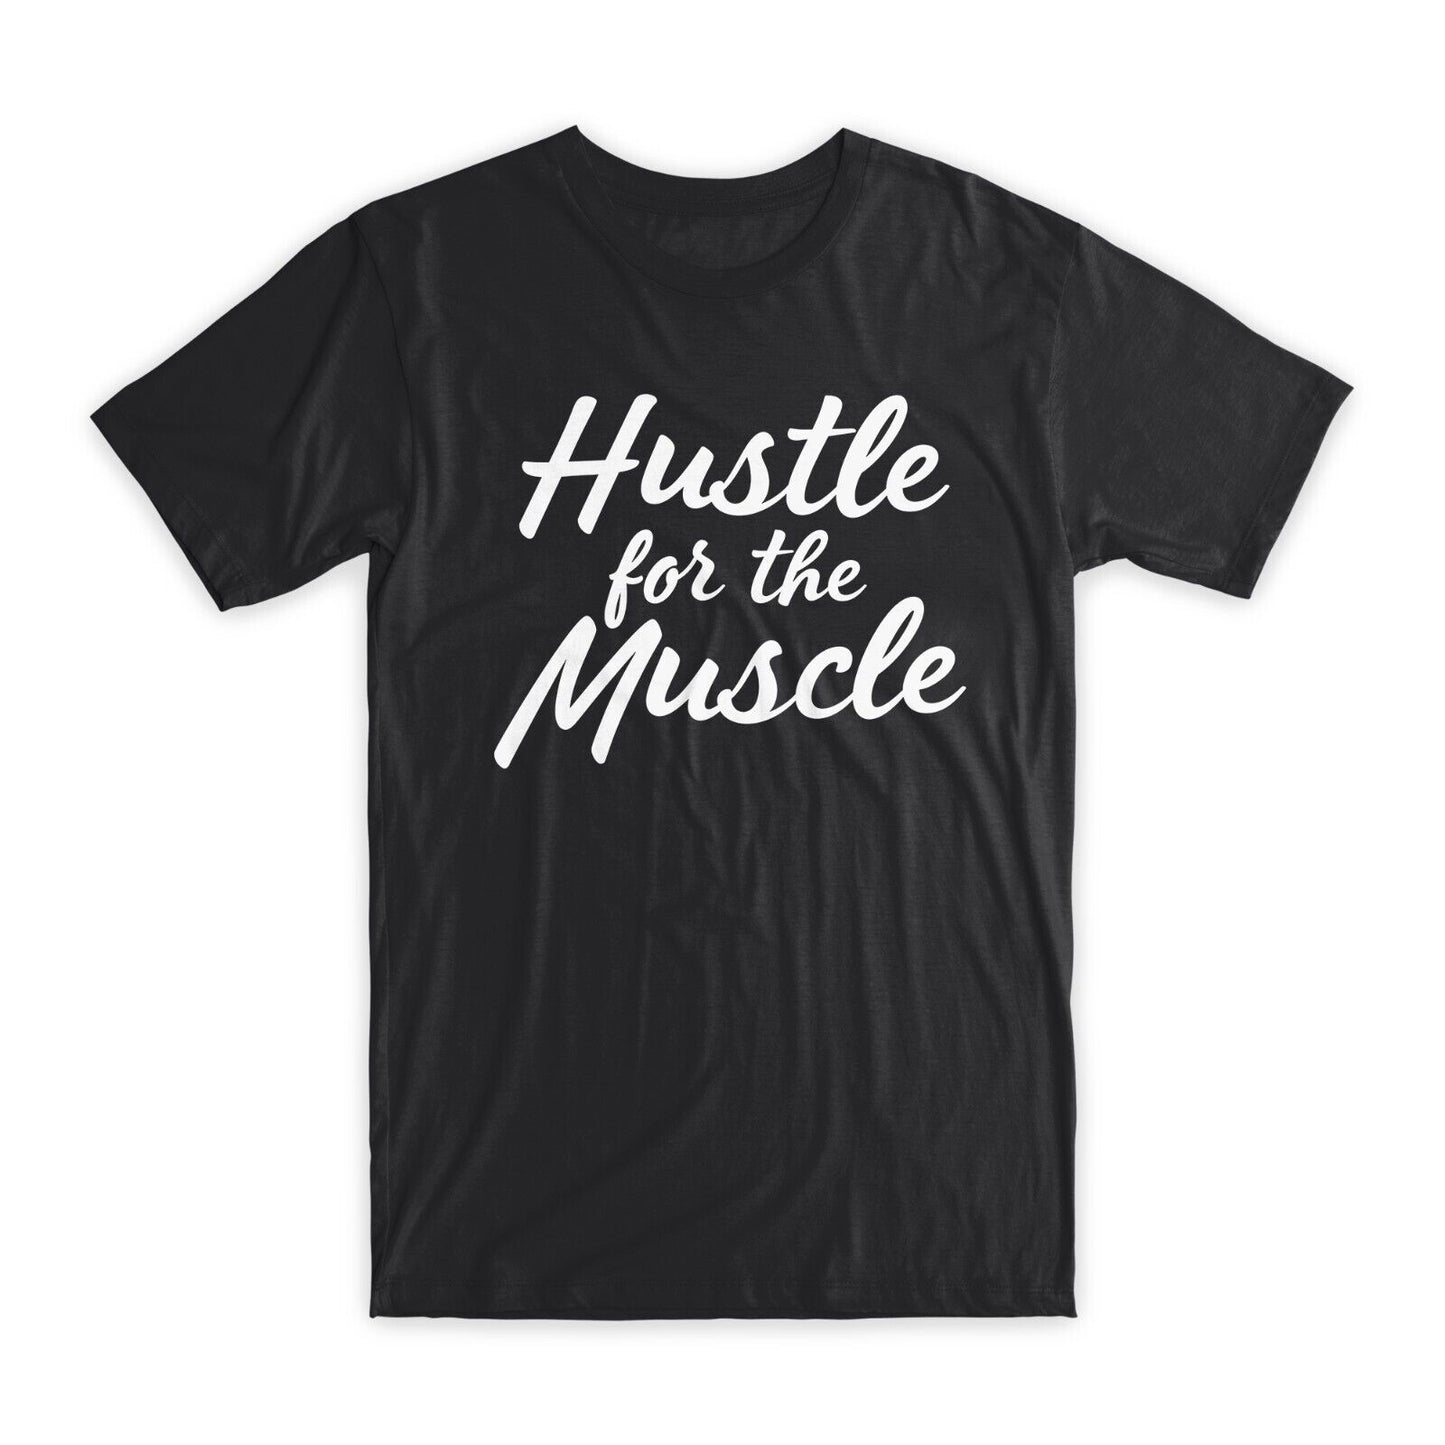 Hustle for The Muscle T-Shirt Premium Soft Cotton Crew Neck Funny Tees Gifts NEW